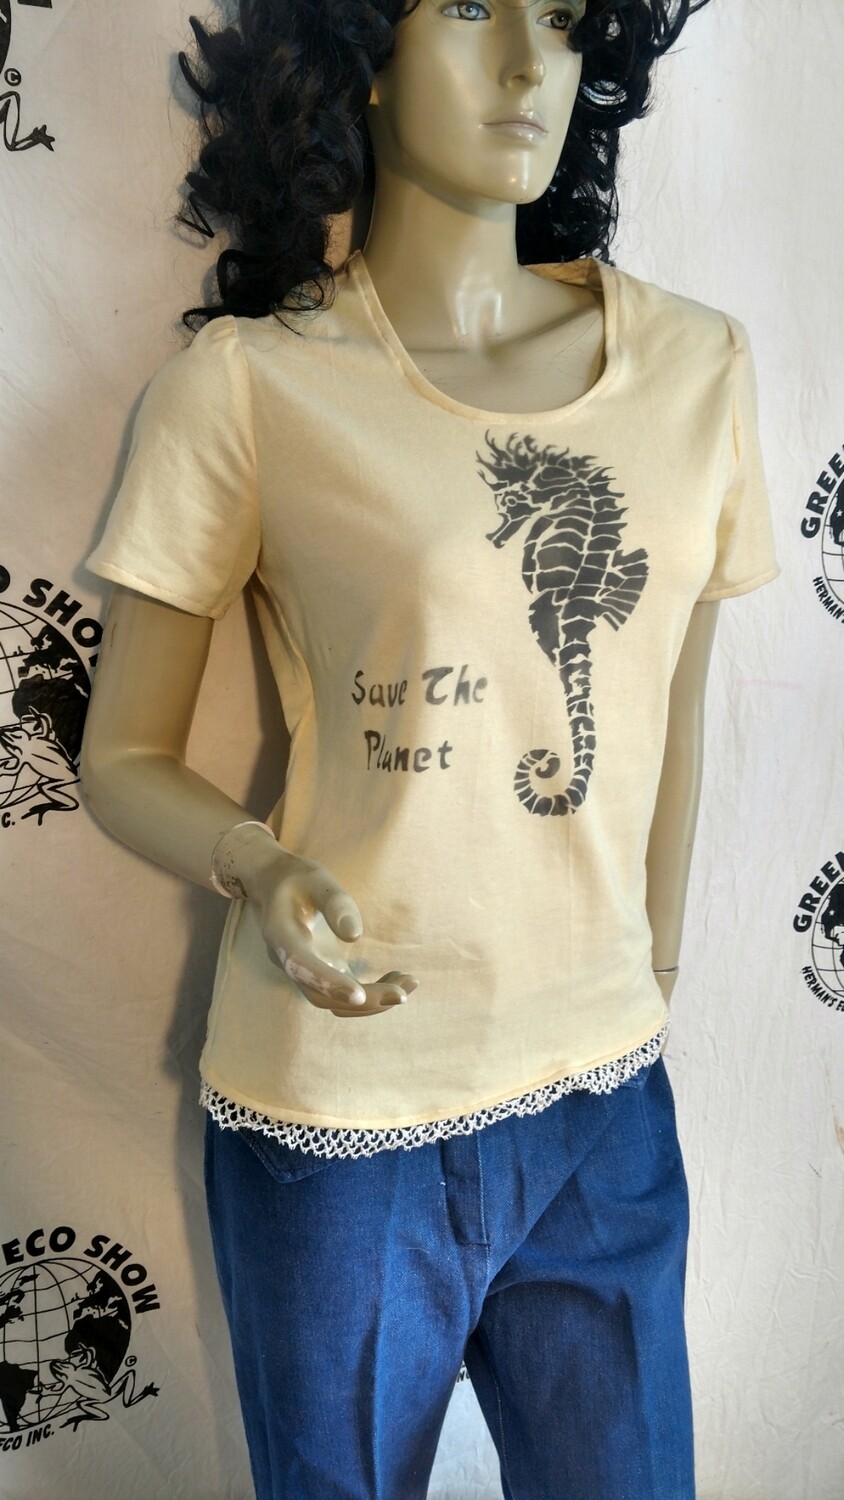 Seahorse save the planet and shirt med USA Hermans